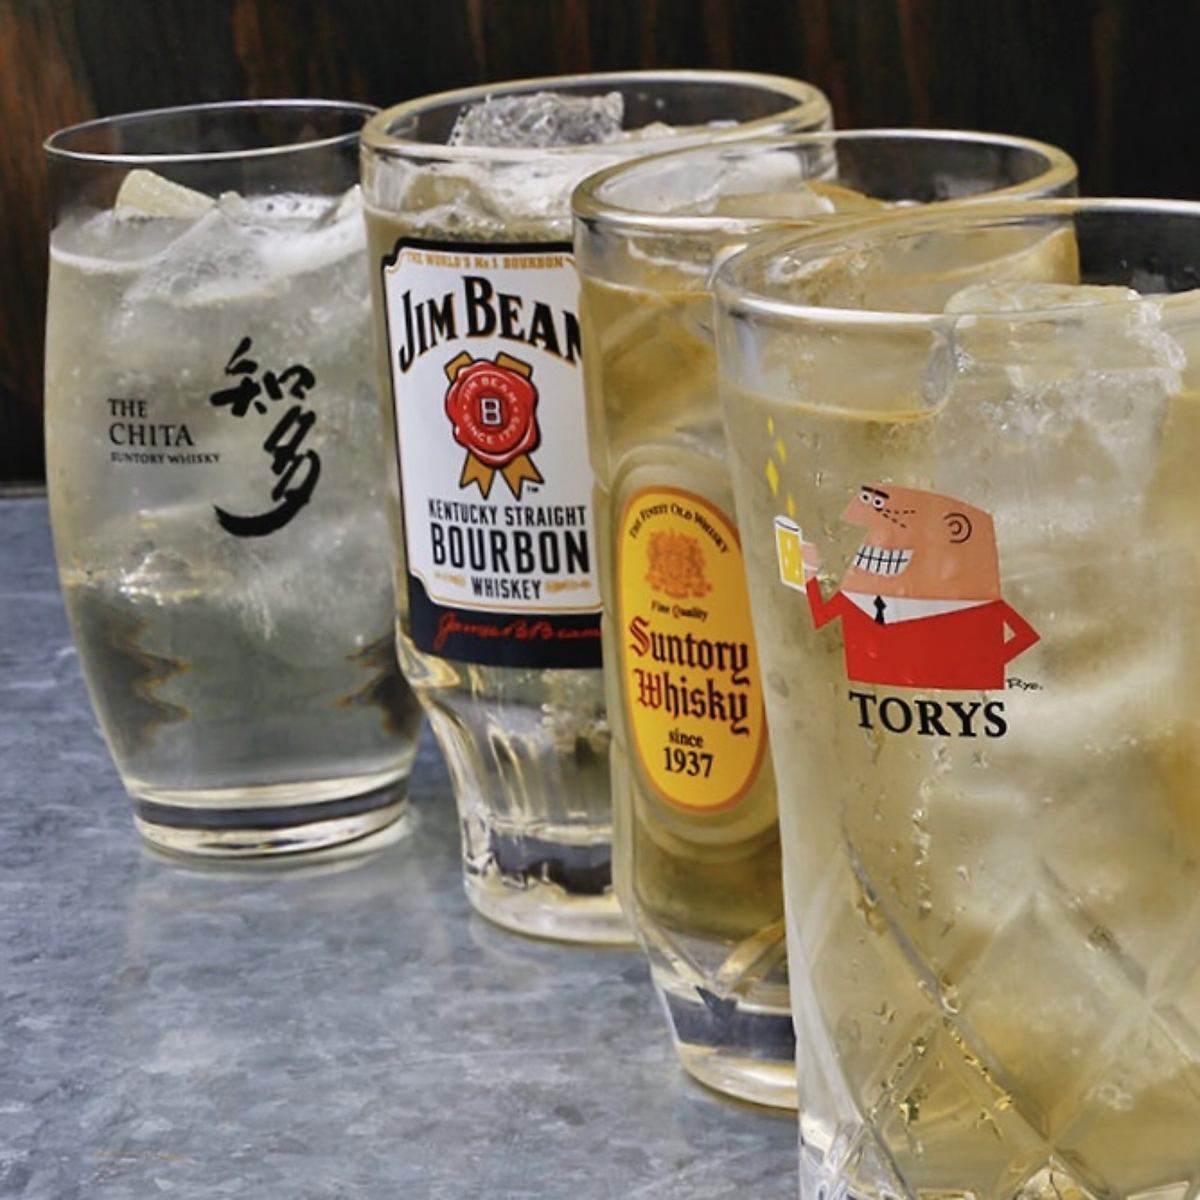 A 120-minute all-you-can-drink menu where you can enjoy The Premium Malt's!